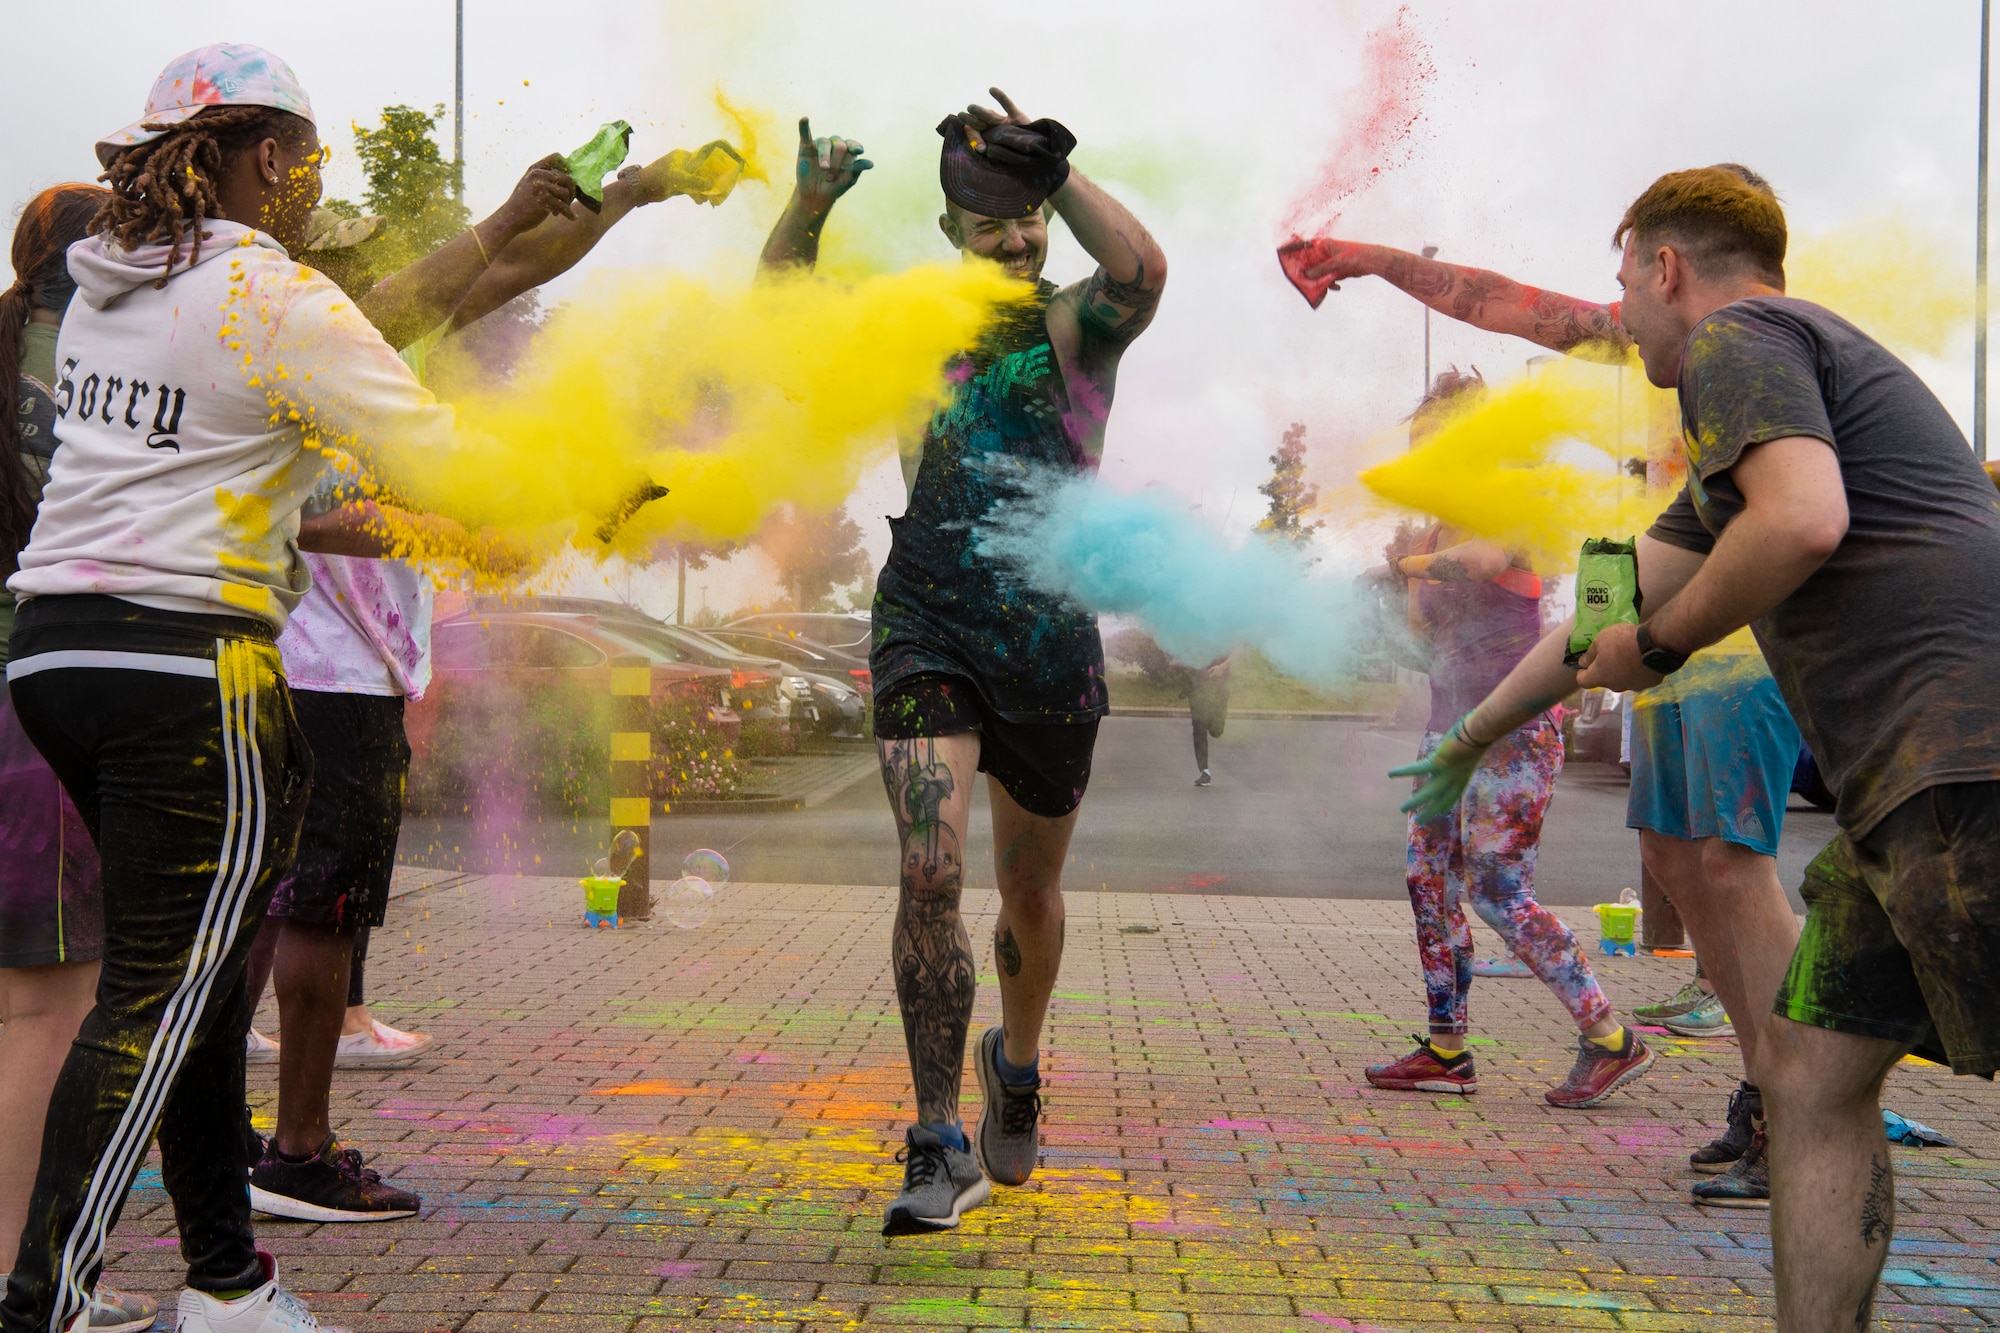 U.S. Air Force Staff Sgt. Nathan Baker, 52nd Force Support Squadron Airman Leadership School instructor, participates in a Pride color run, June 30, 2021, on Spangdahlem Air Base, Germany. Pride Month is celebrated every year to recognize and honor the Stonewall riots in 1969, a pivotal time for the lesbian, gay, bisexual, transgender, and queer community  in their fight for equality as United States citizens. (U.S. Air Force photo by Staff Sgt. Melody W. Howley)